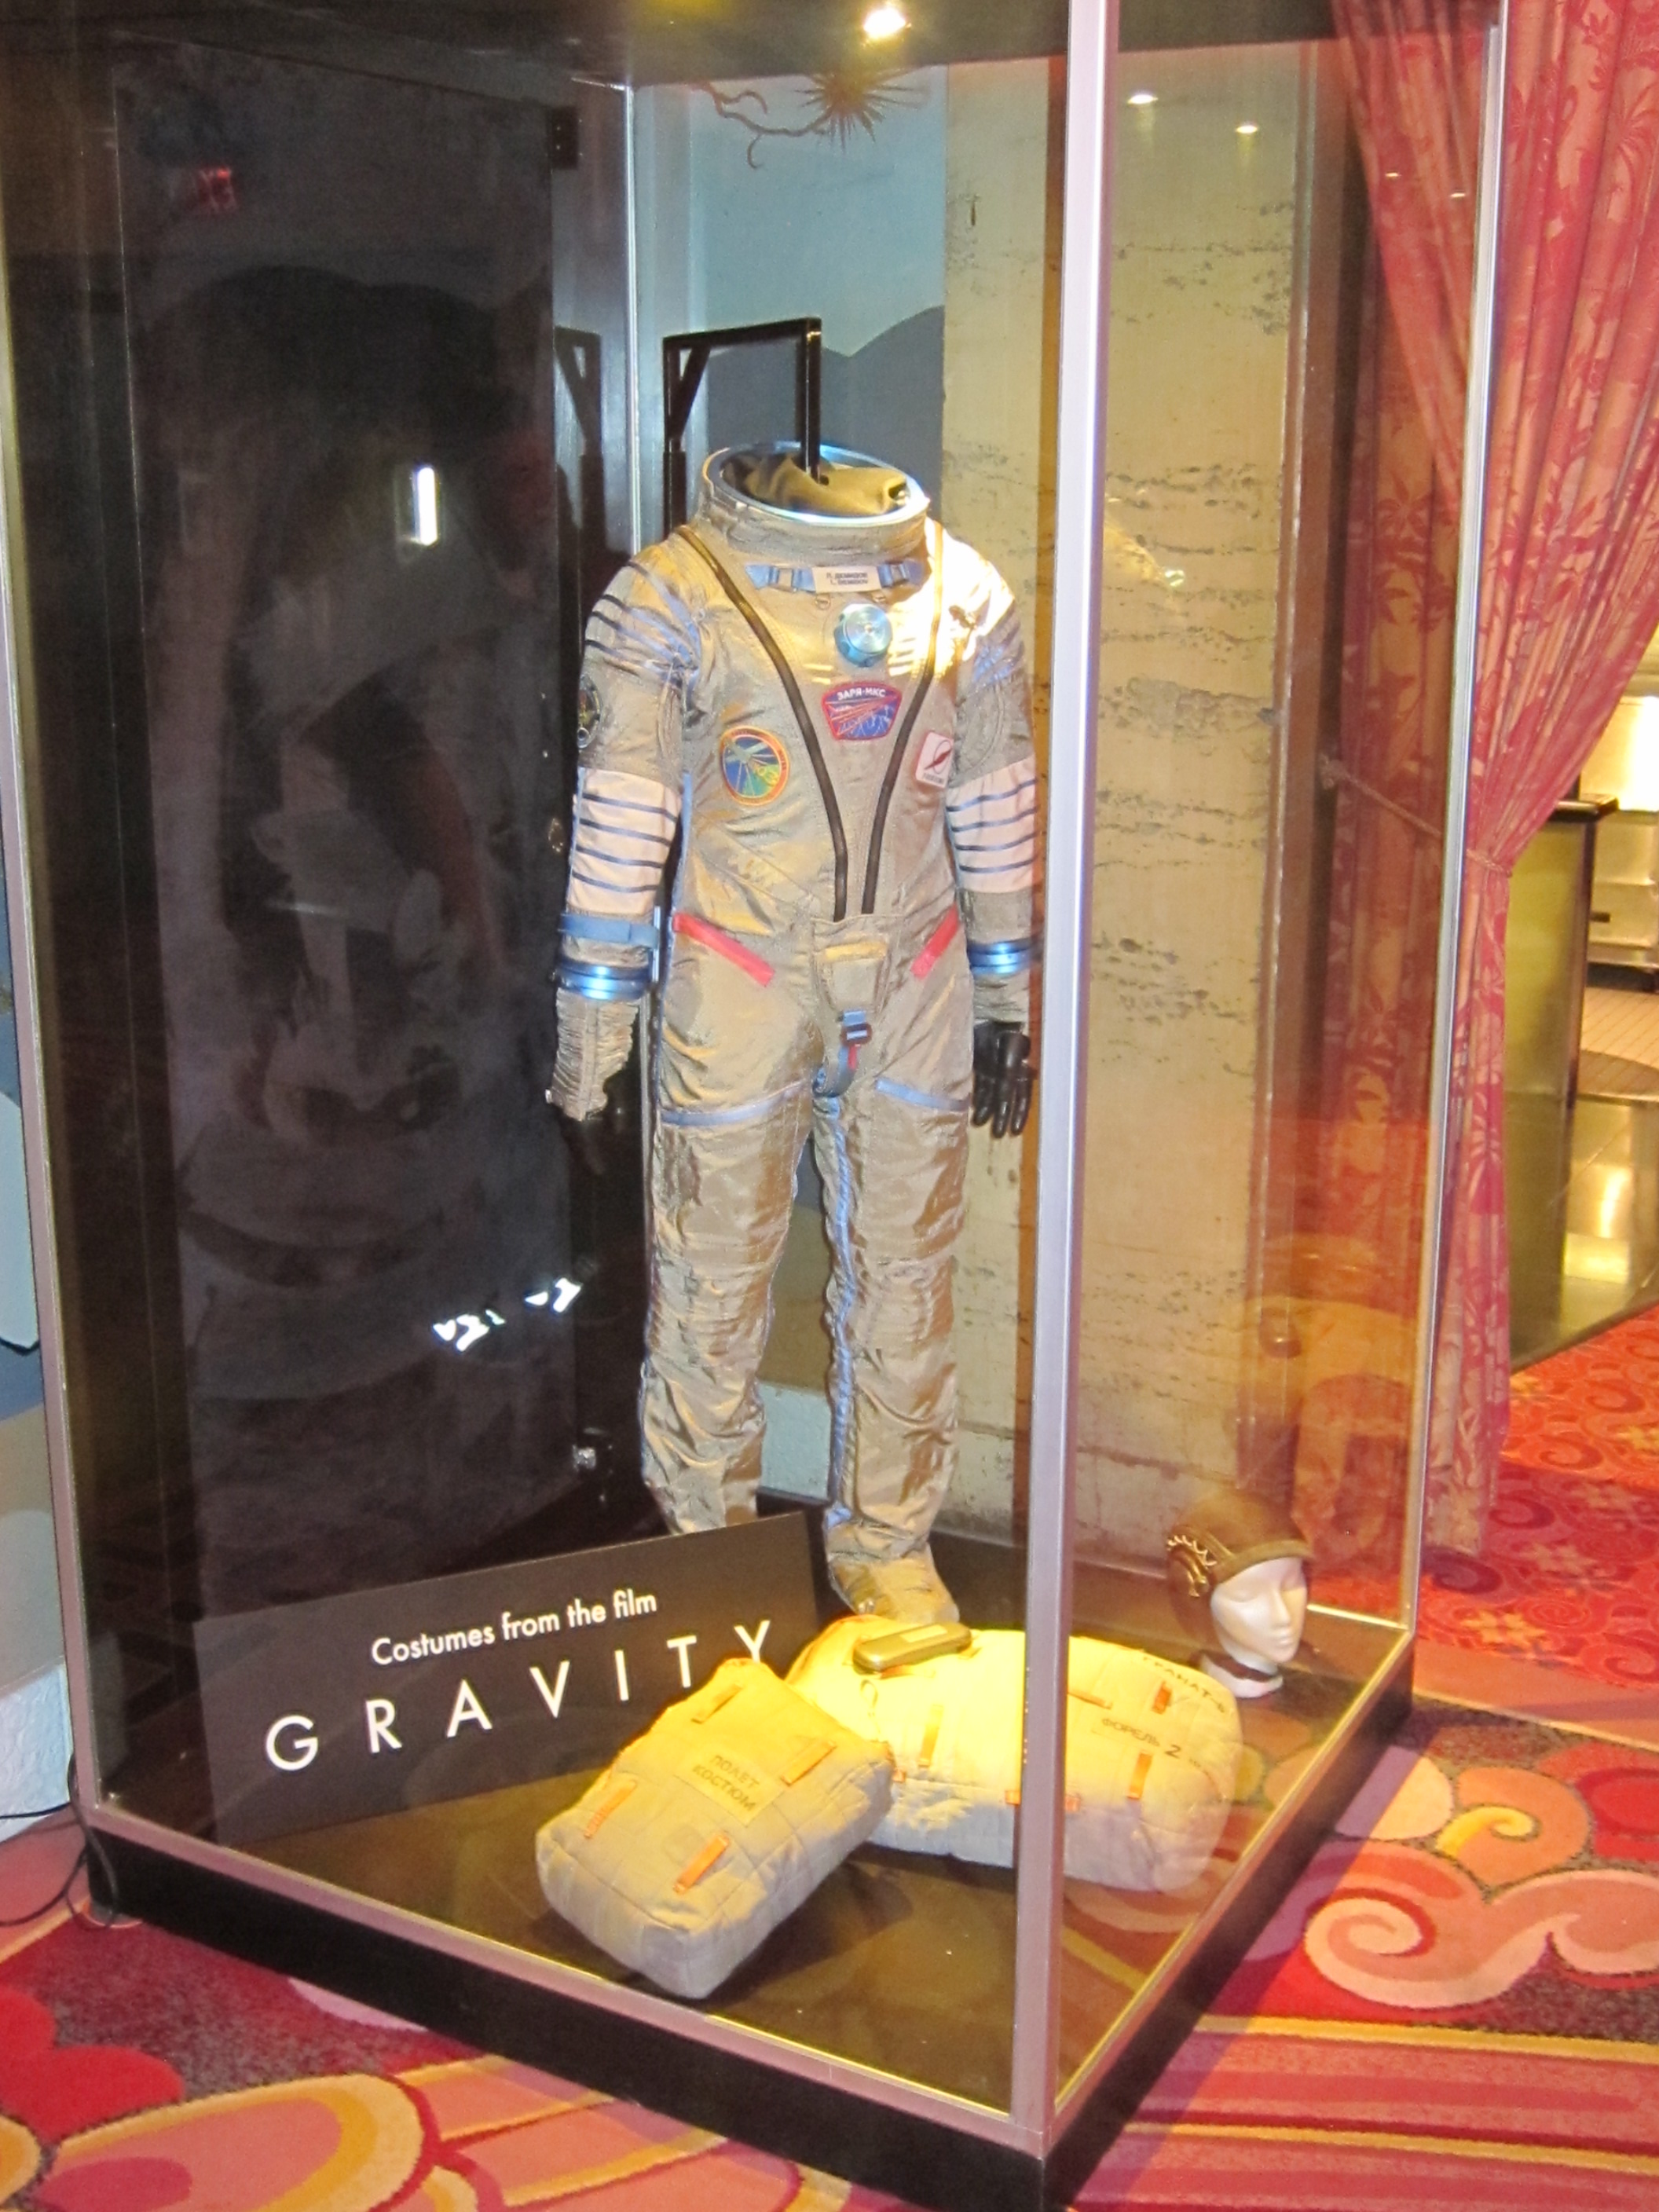 Sandra Bullock's space suit  with some props used in the making of GRAVITY.